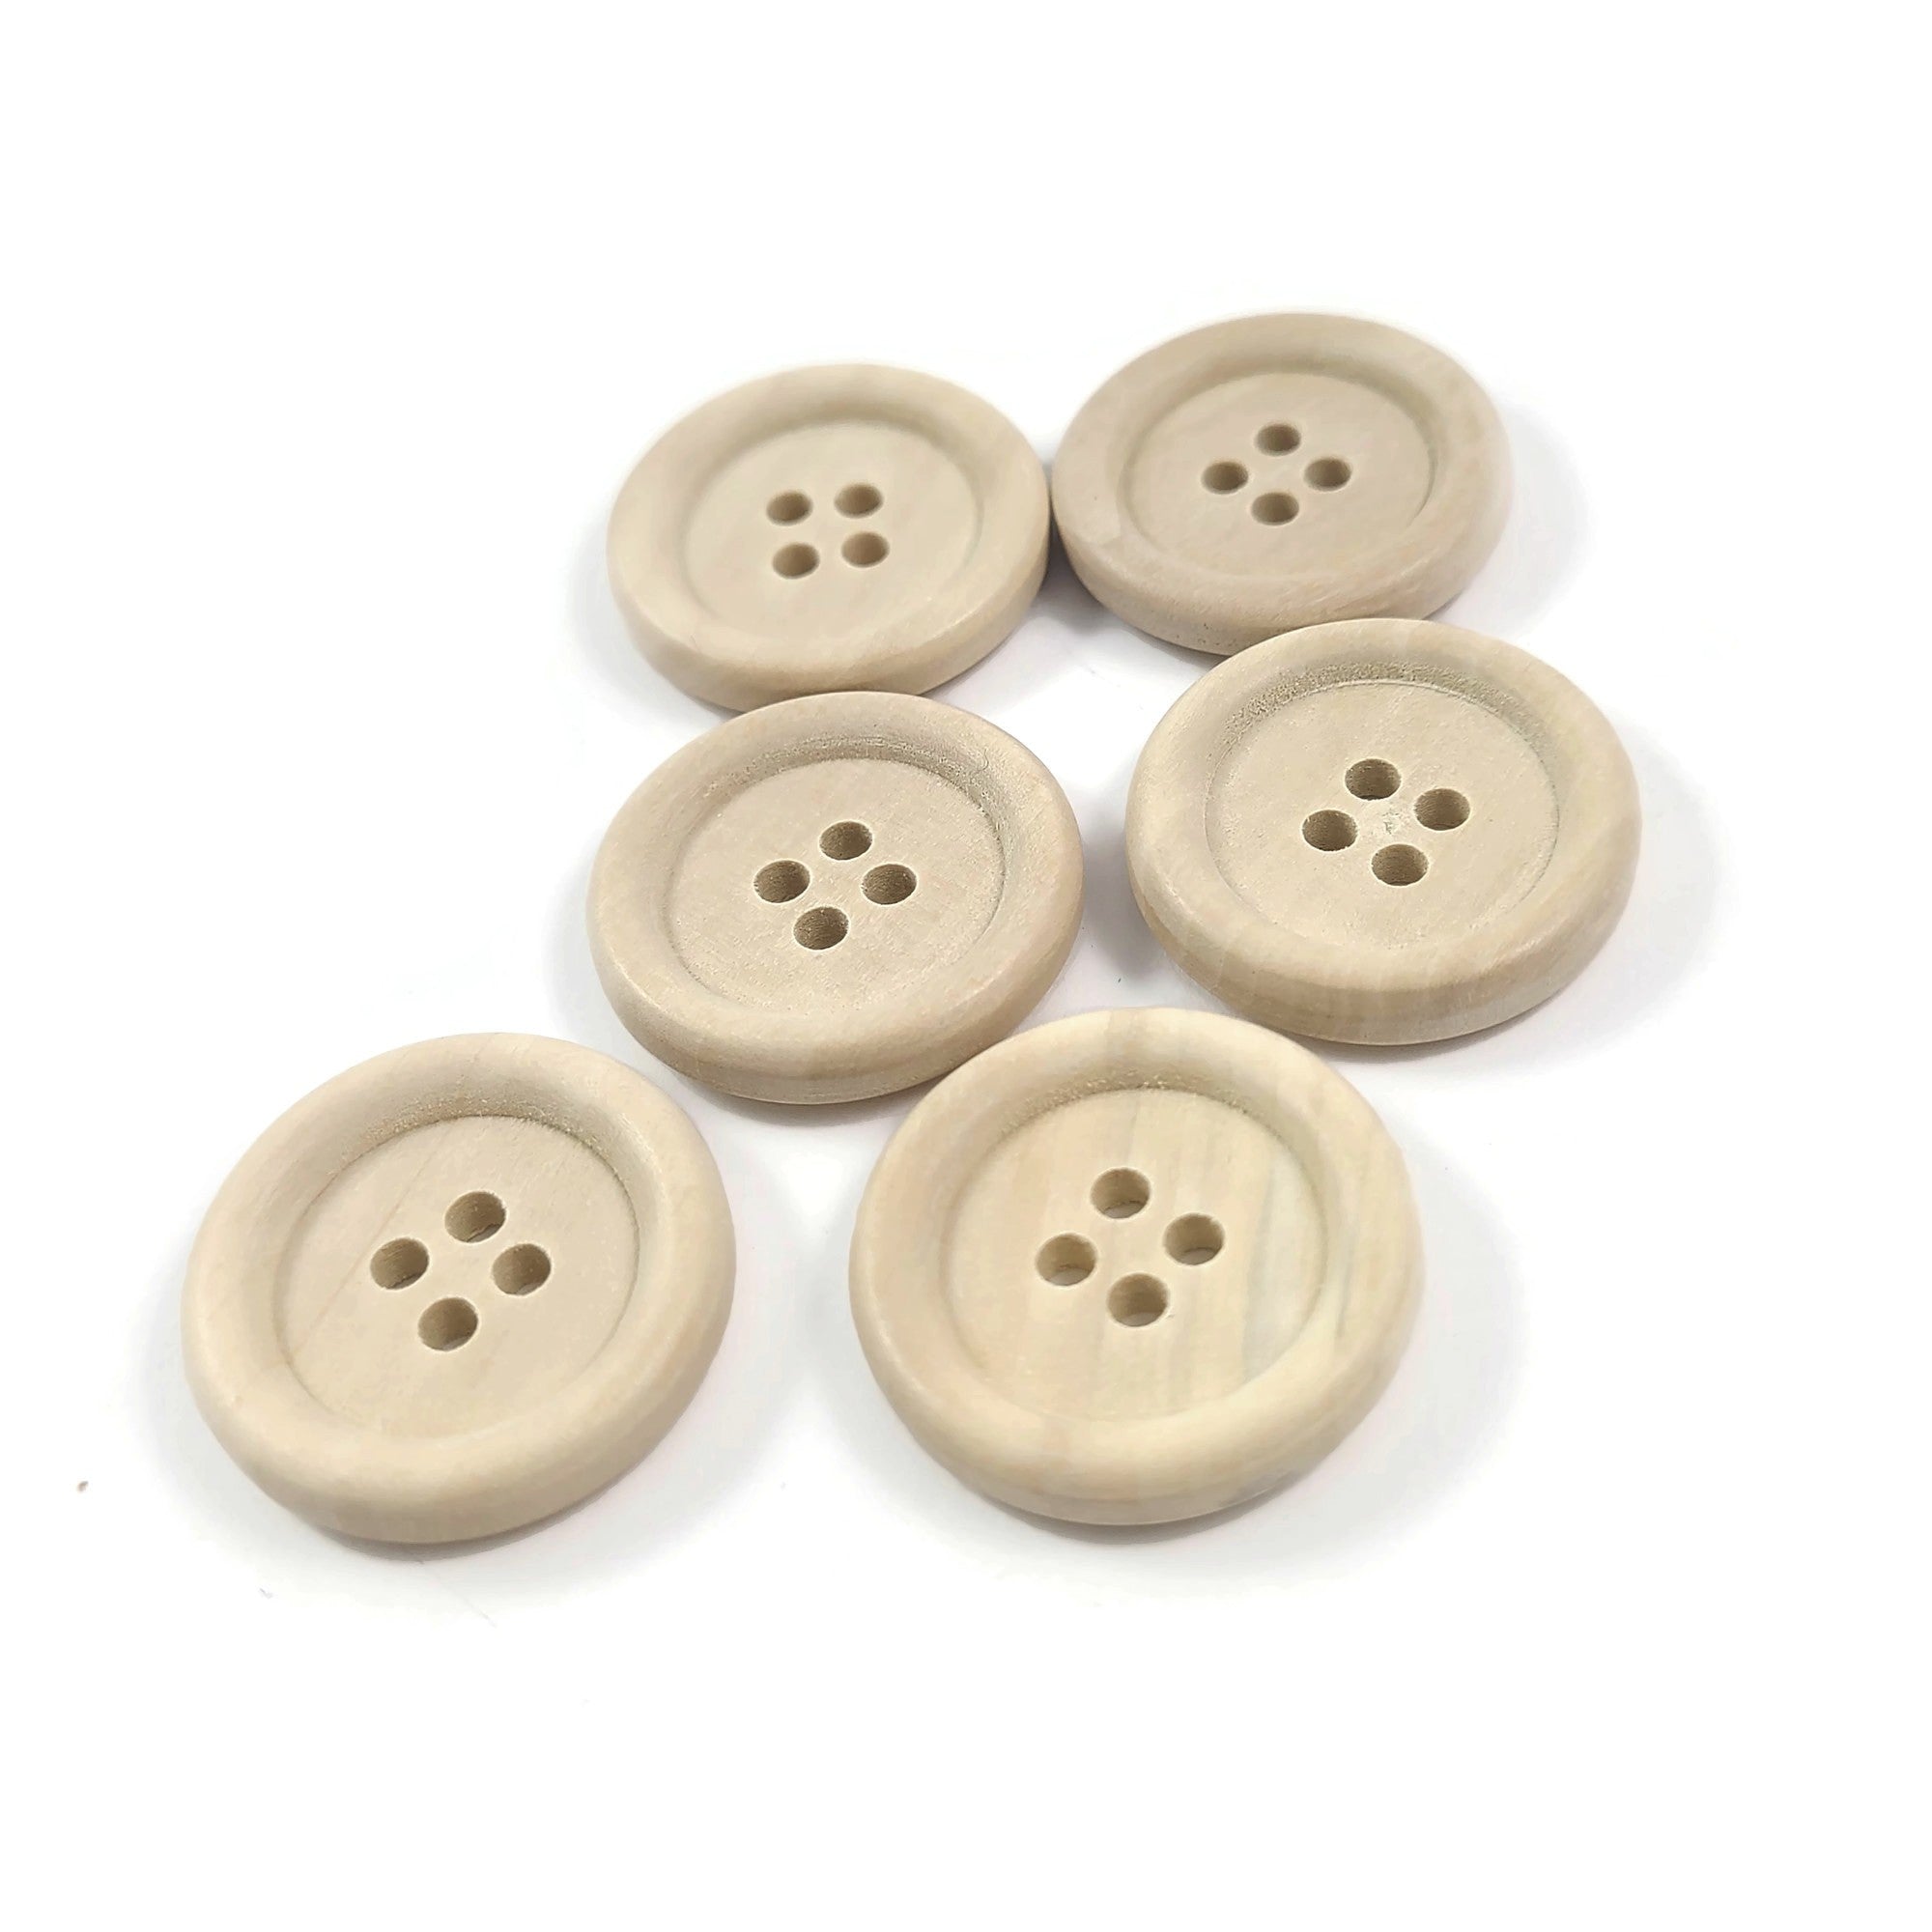 Large Buttons 4 Holes,Big Wooden Buttons,Wood Button for Sewing,25mm Craft Button,1 inch Black Brown Coffee Button 50pcs Q3372